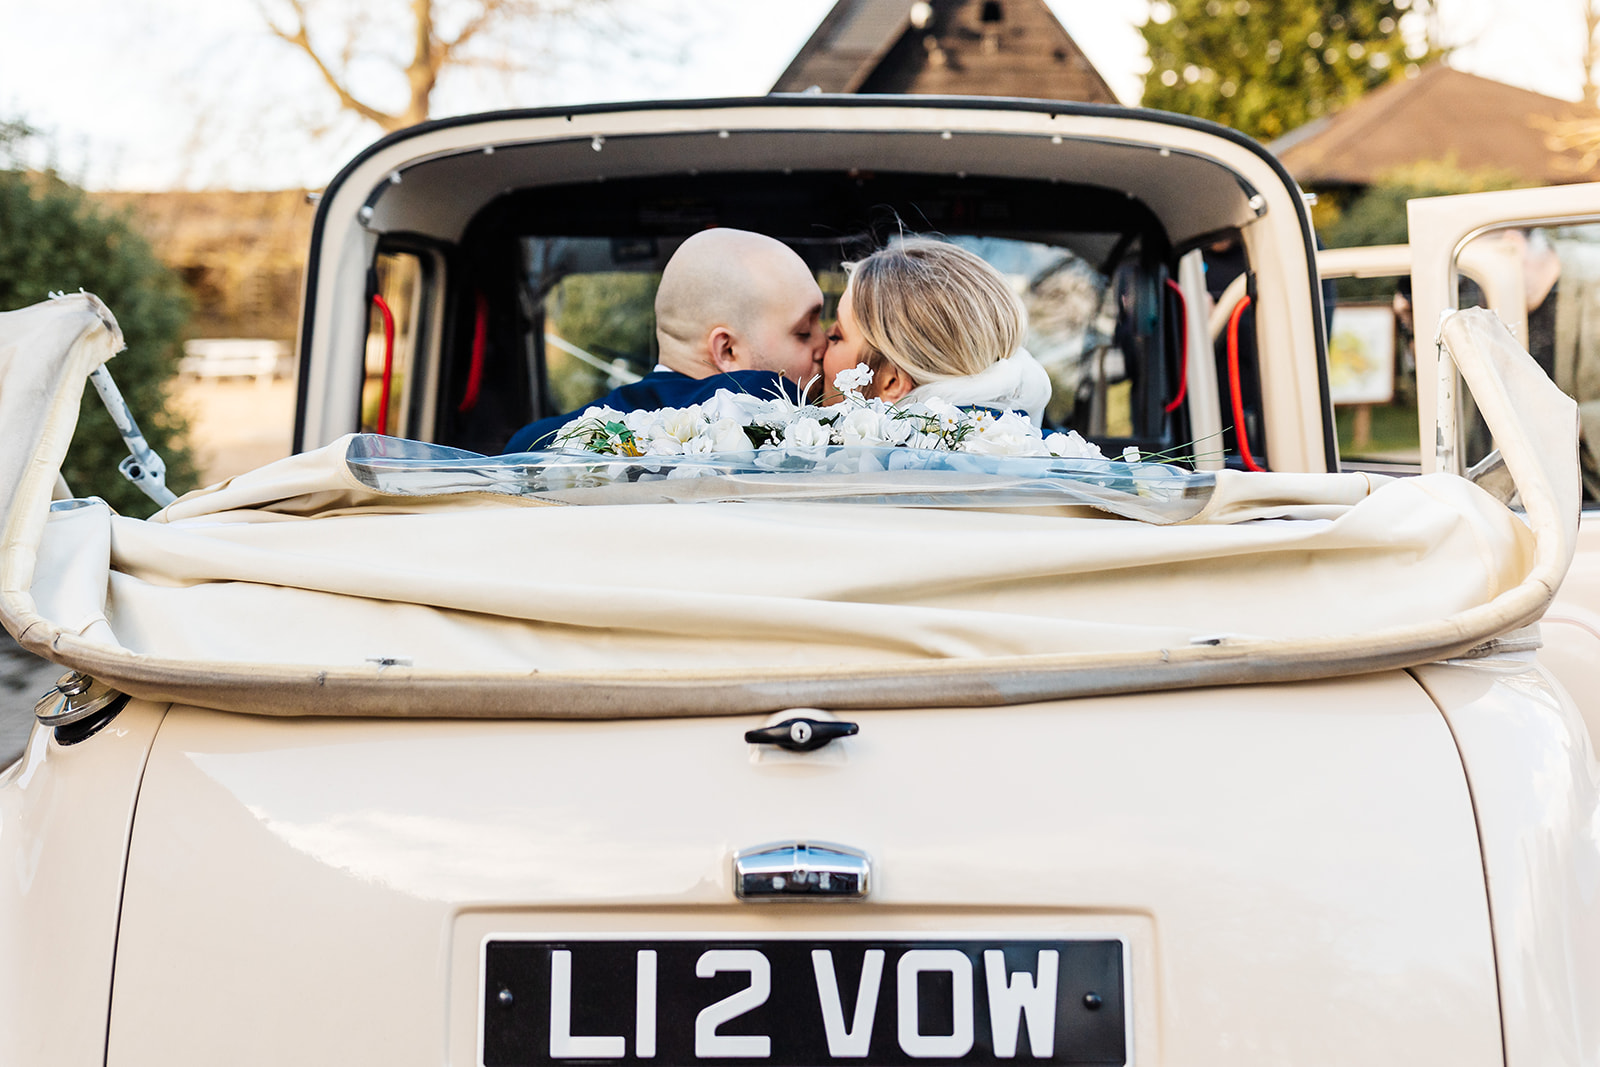 Couple leave church in vintage car with flowers in the back